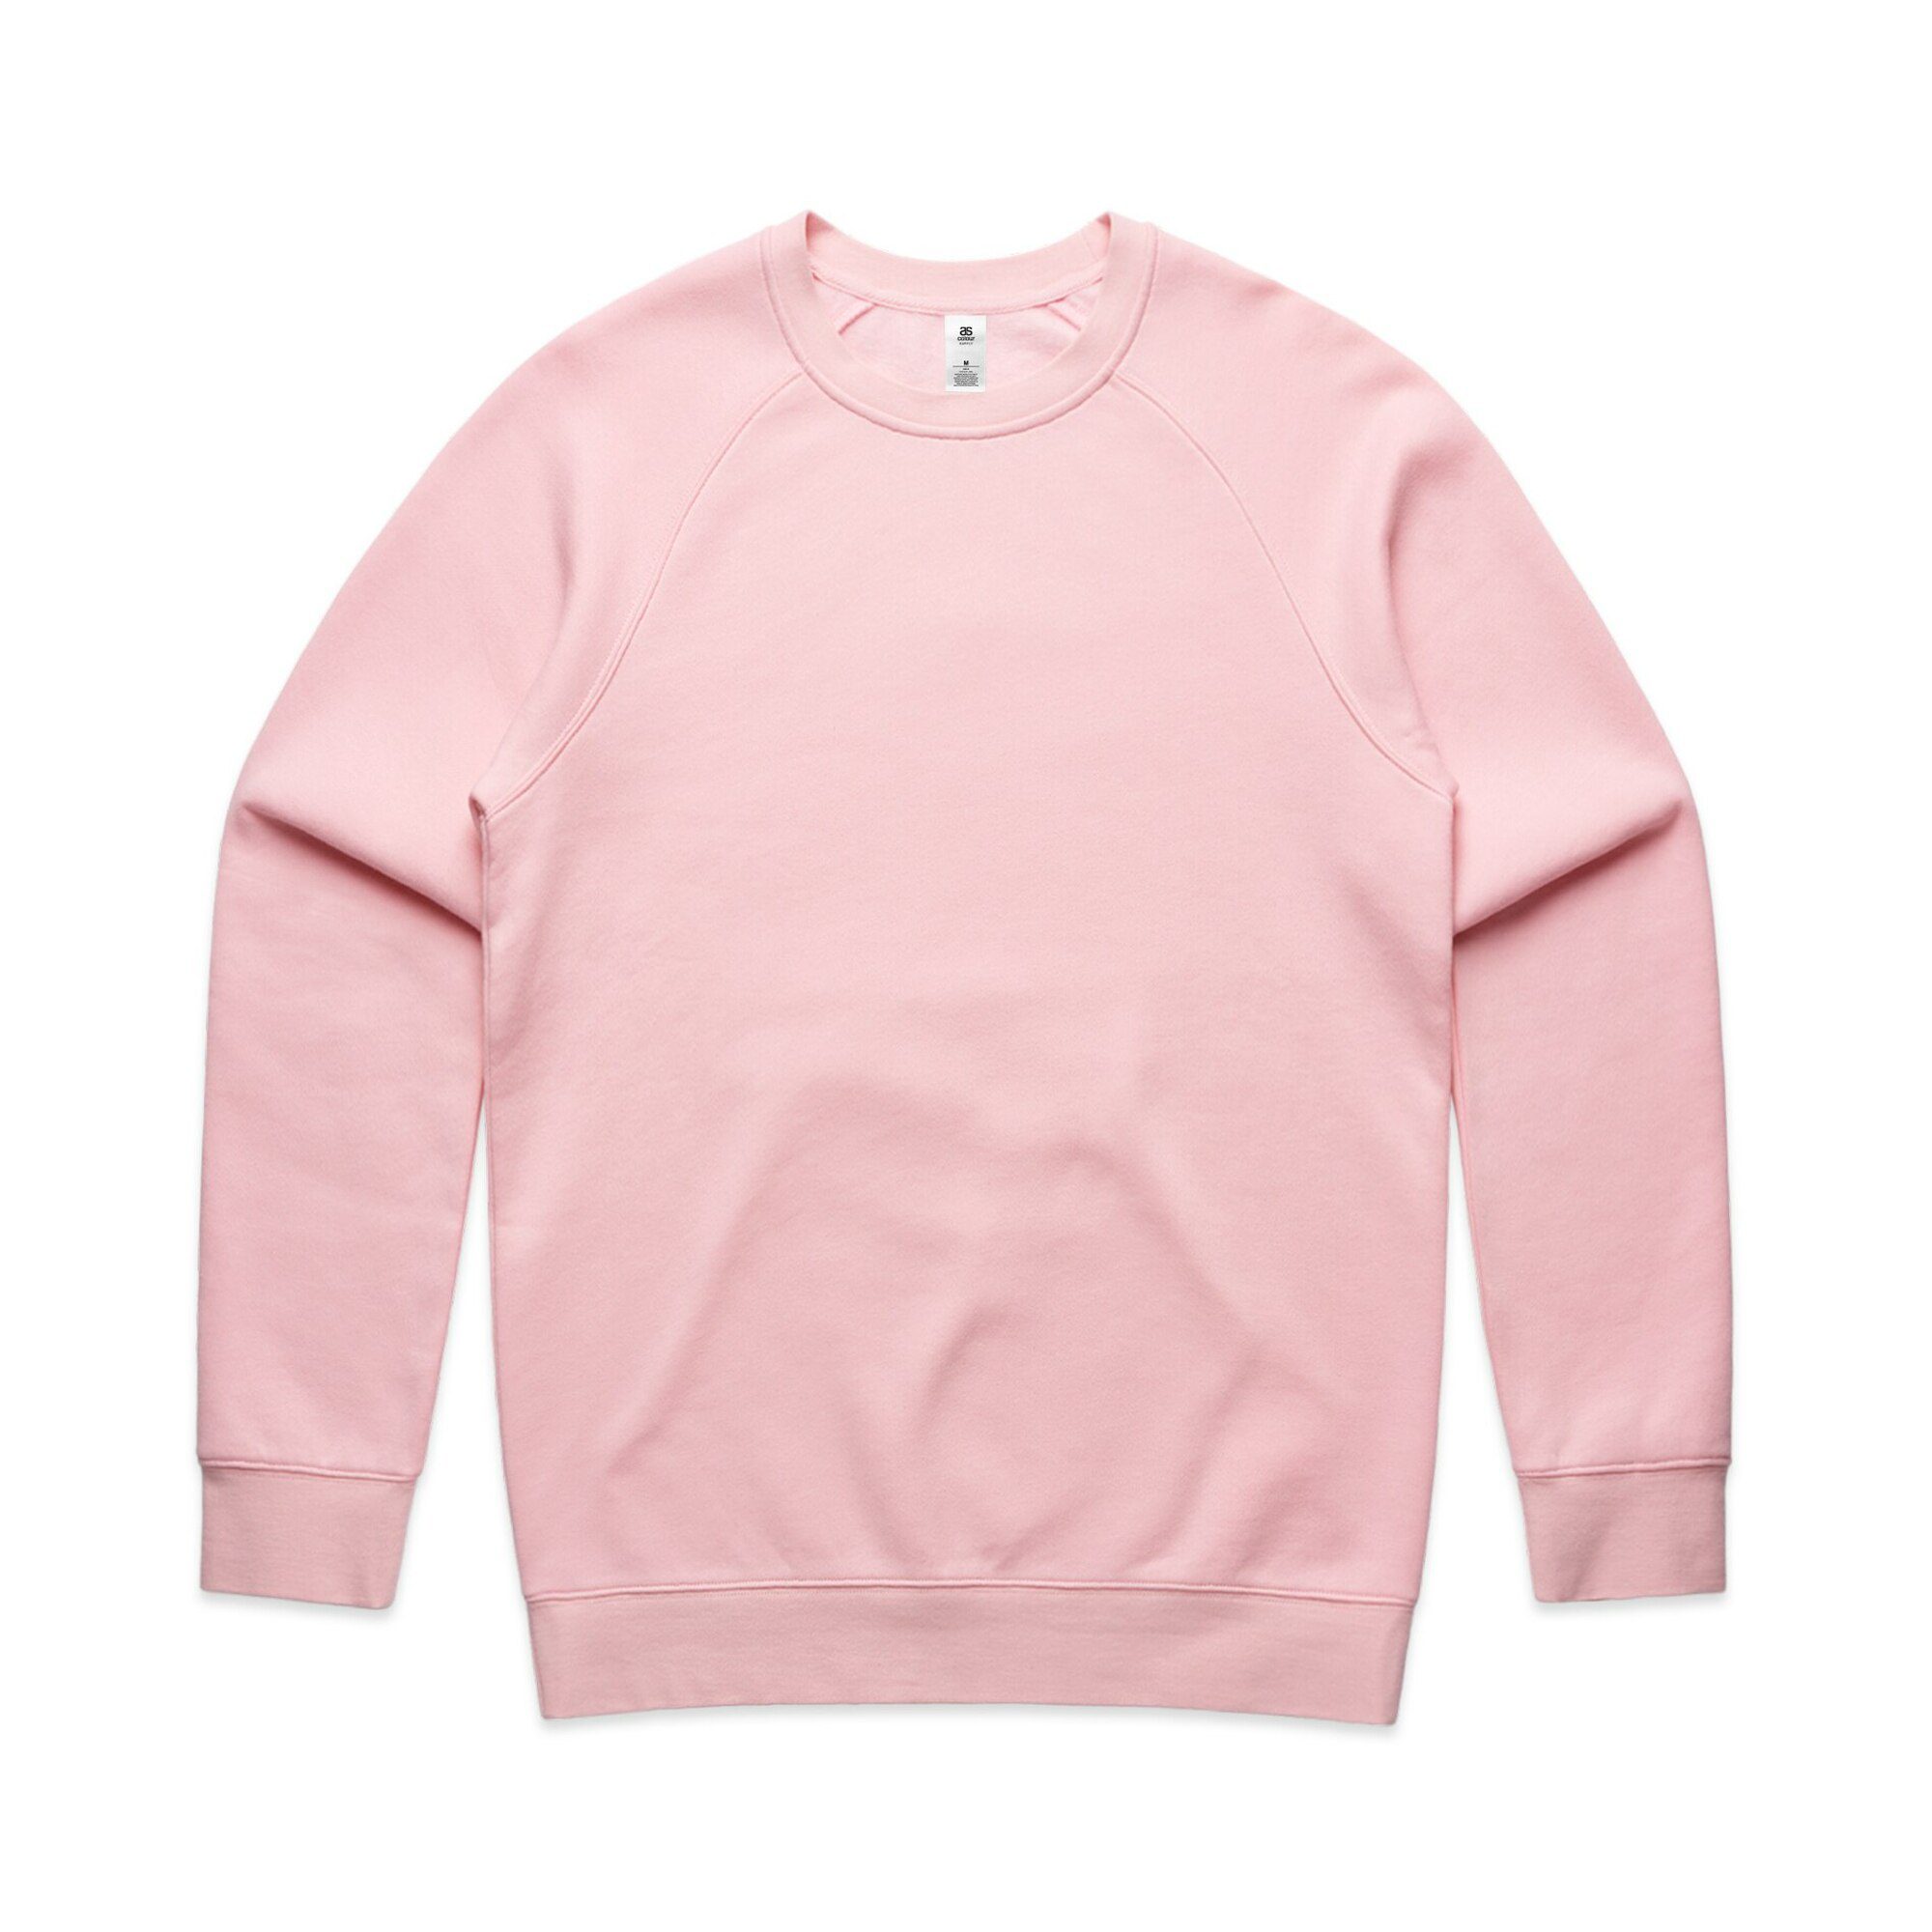 5100_AS_Mens-Supply-Crew_Pink